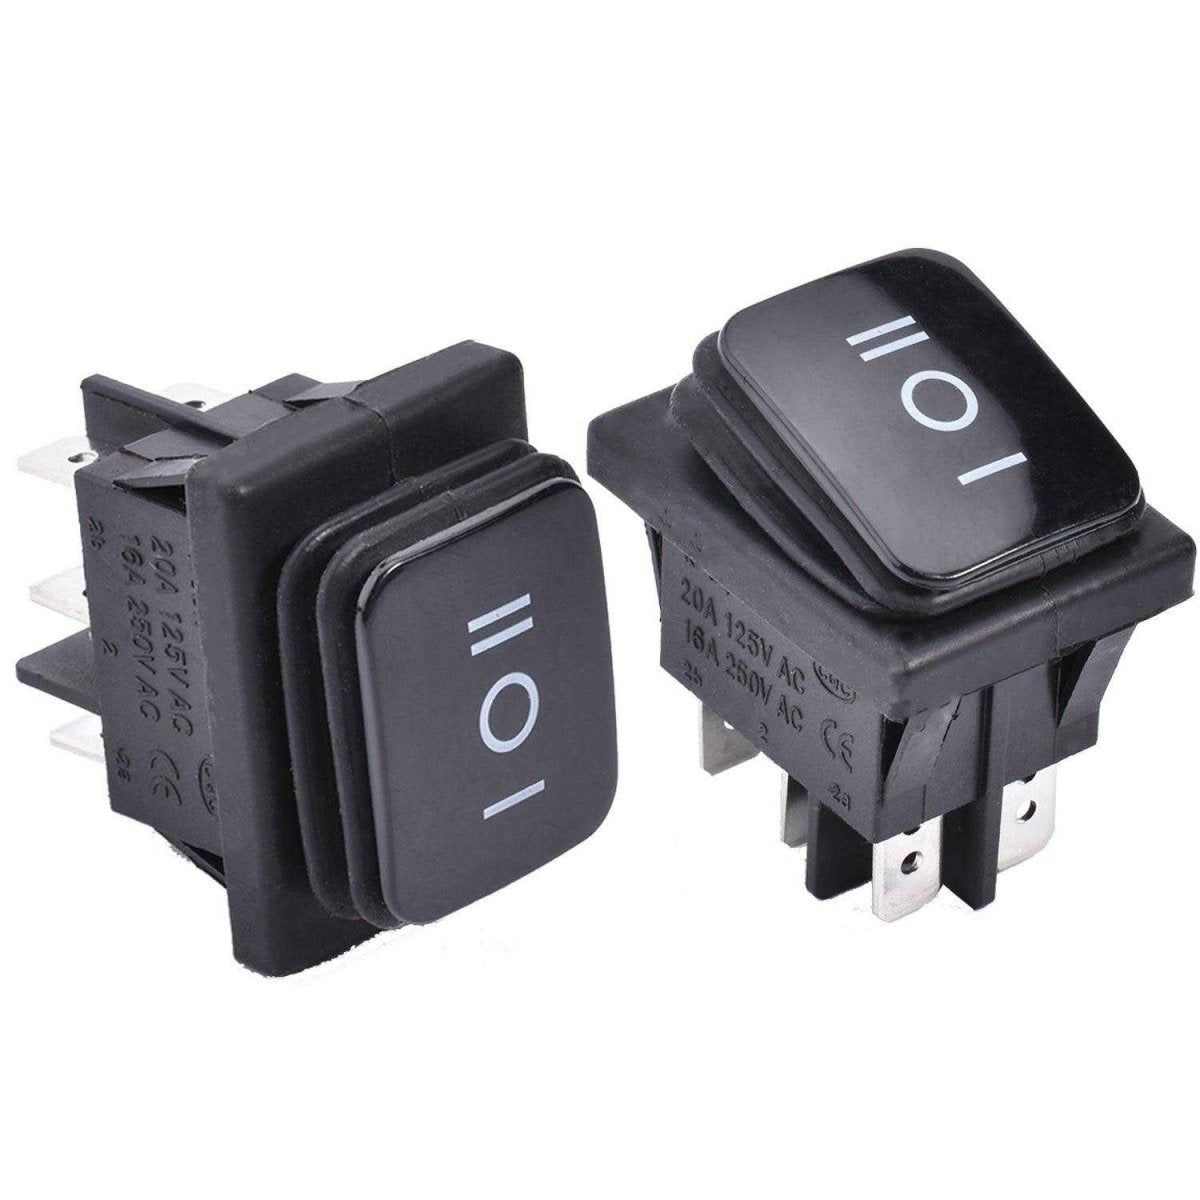 6 Pins 3 Position Rocker Toggle Switch 2Pcs Boat Waterproof AC 125V/20A 250V/16A ON-Off-ON DPST KCD4-203N (Black Red) - Black-